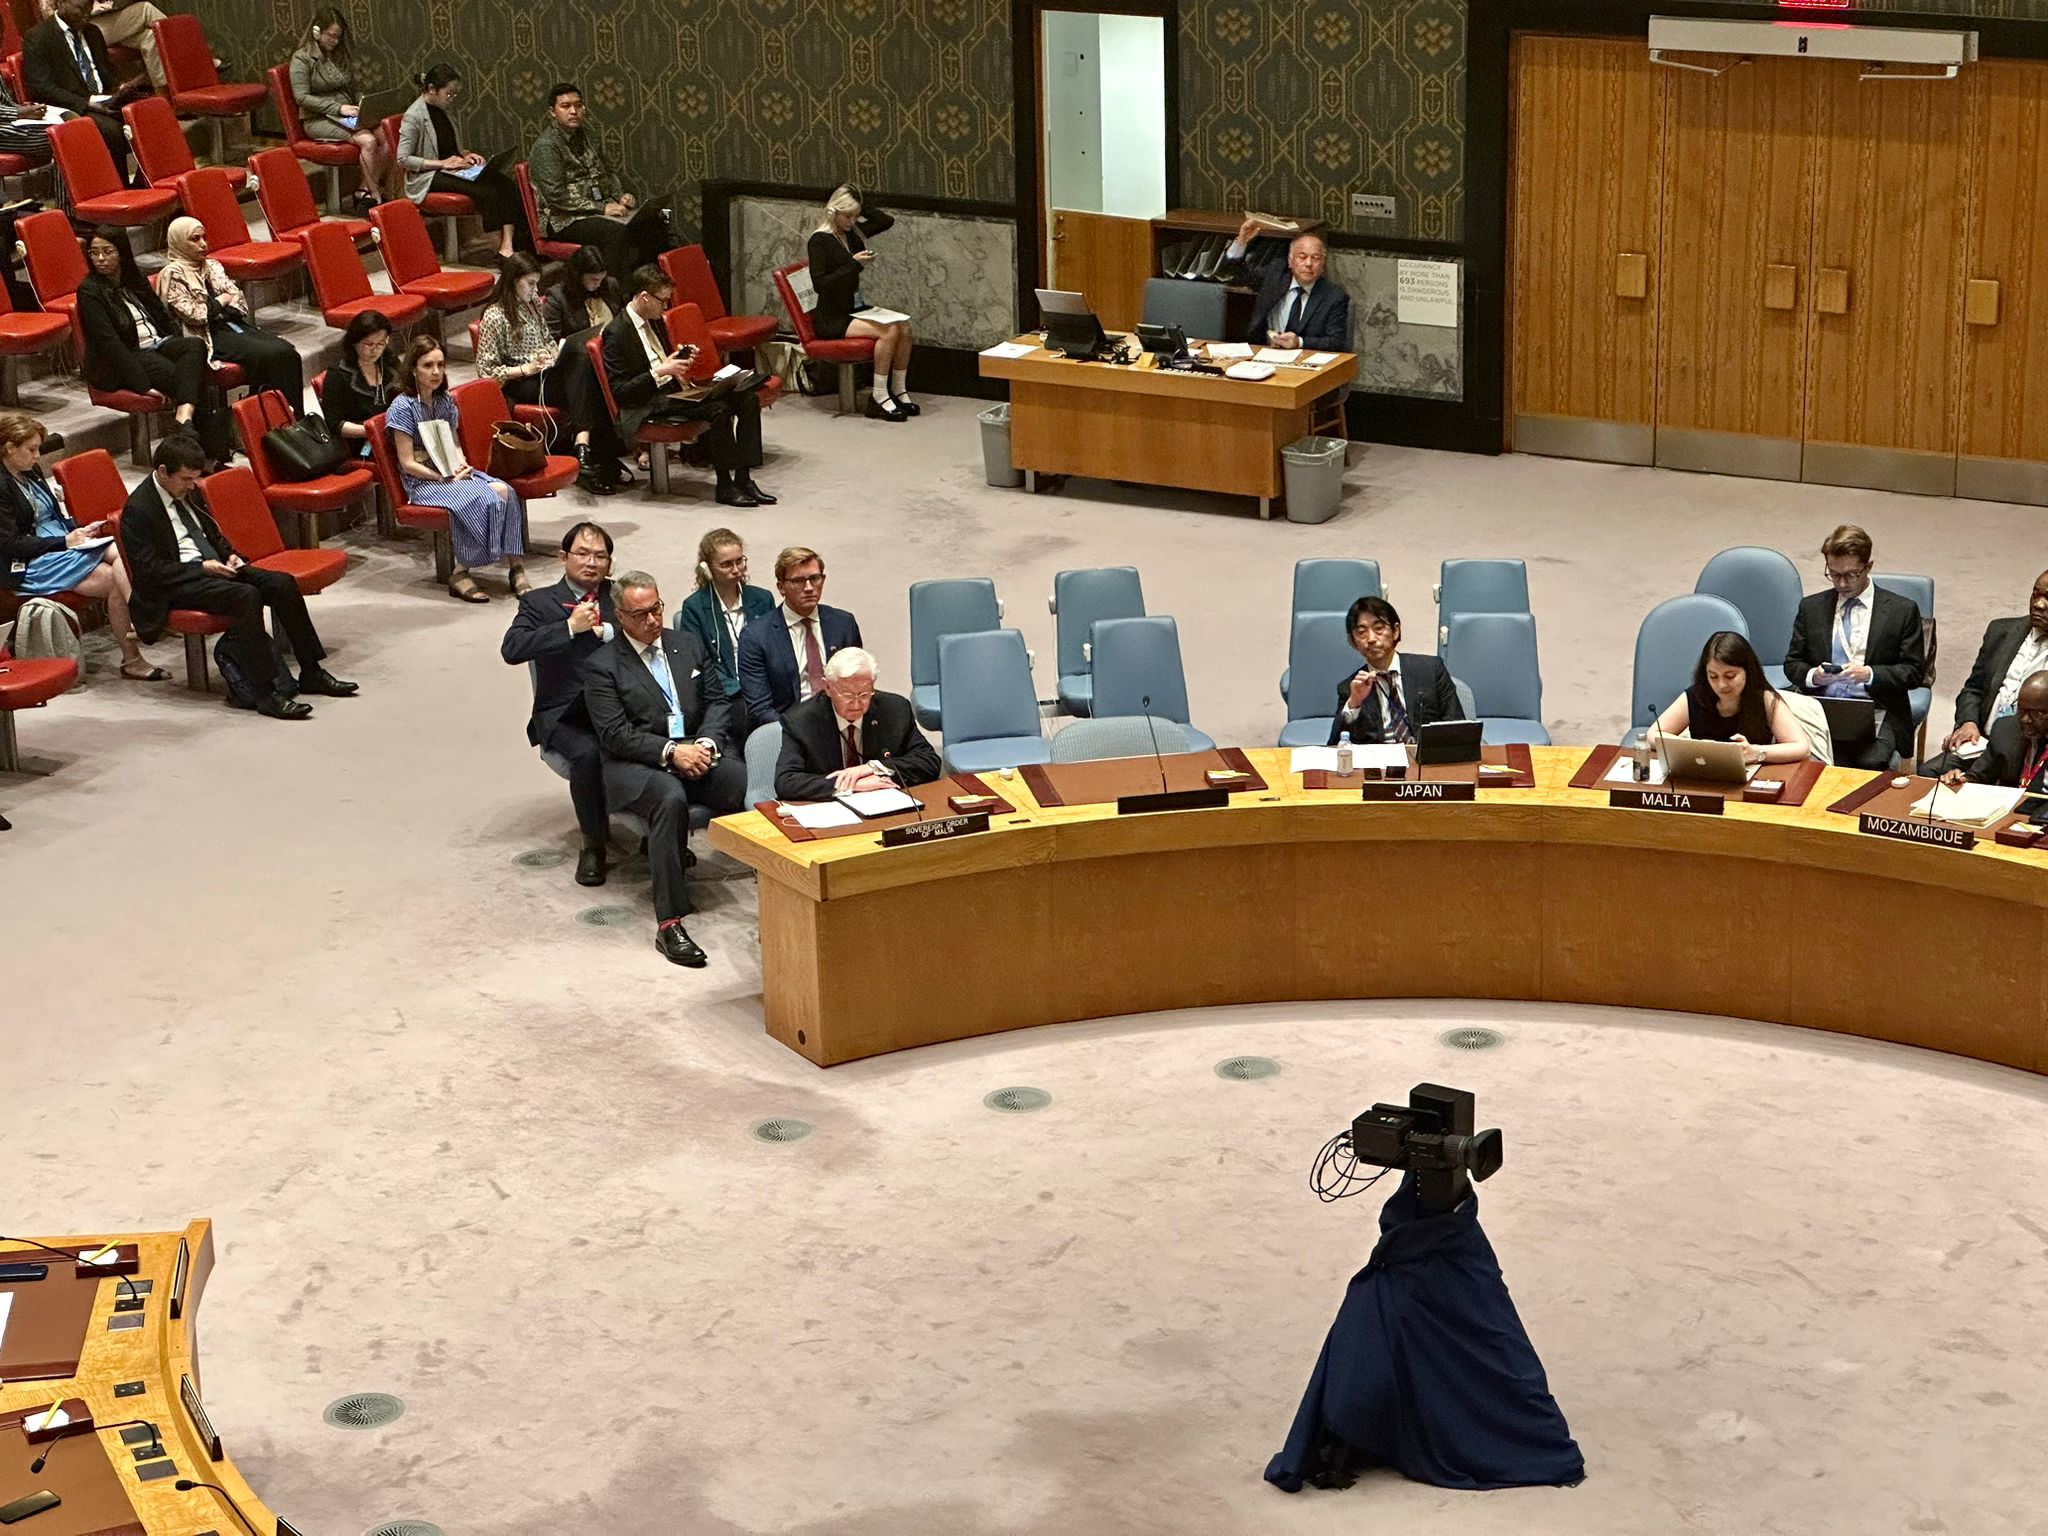 H.E. Ambassador Beresford-Hill addressed the Security Council during the Open Debate on Famine and Global Food Insecurity organized by the Permanent Representative of the United States to the UN.